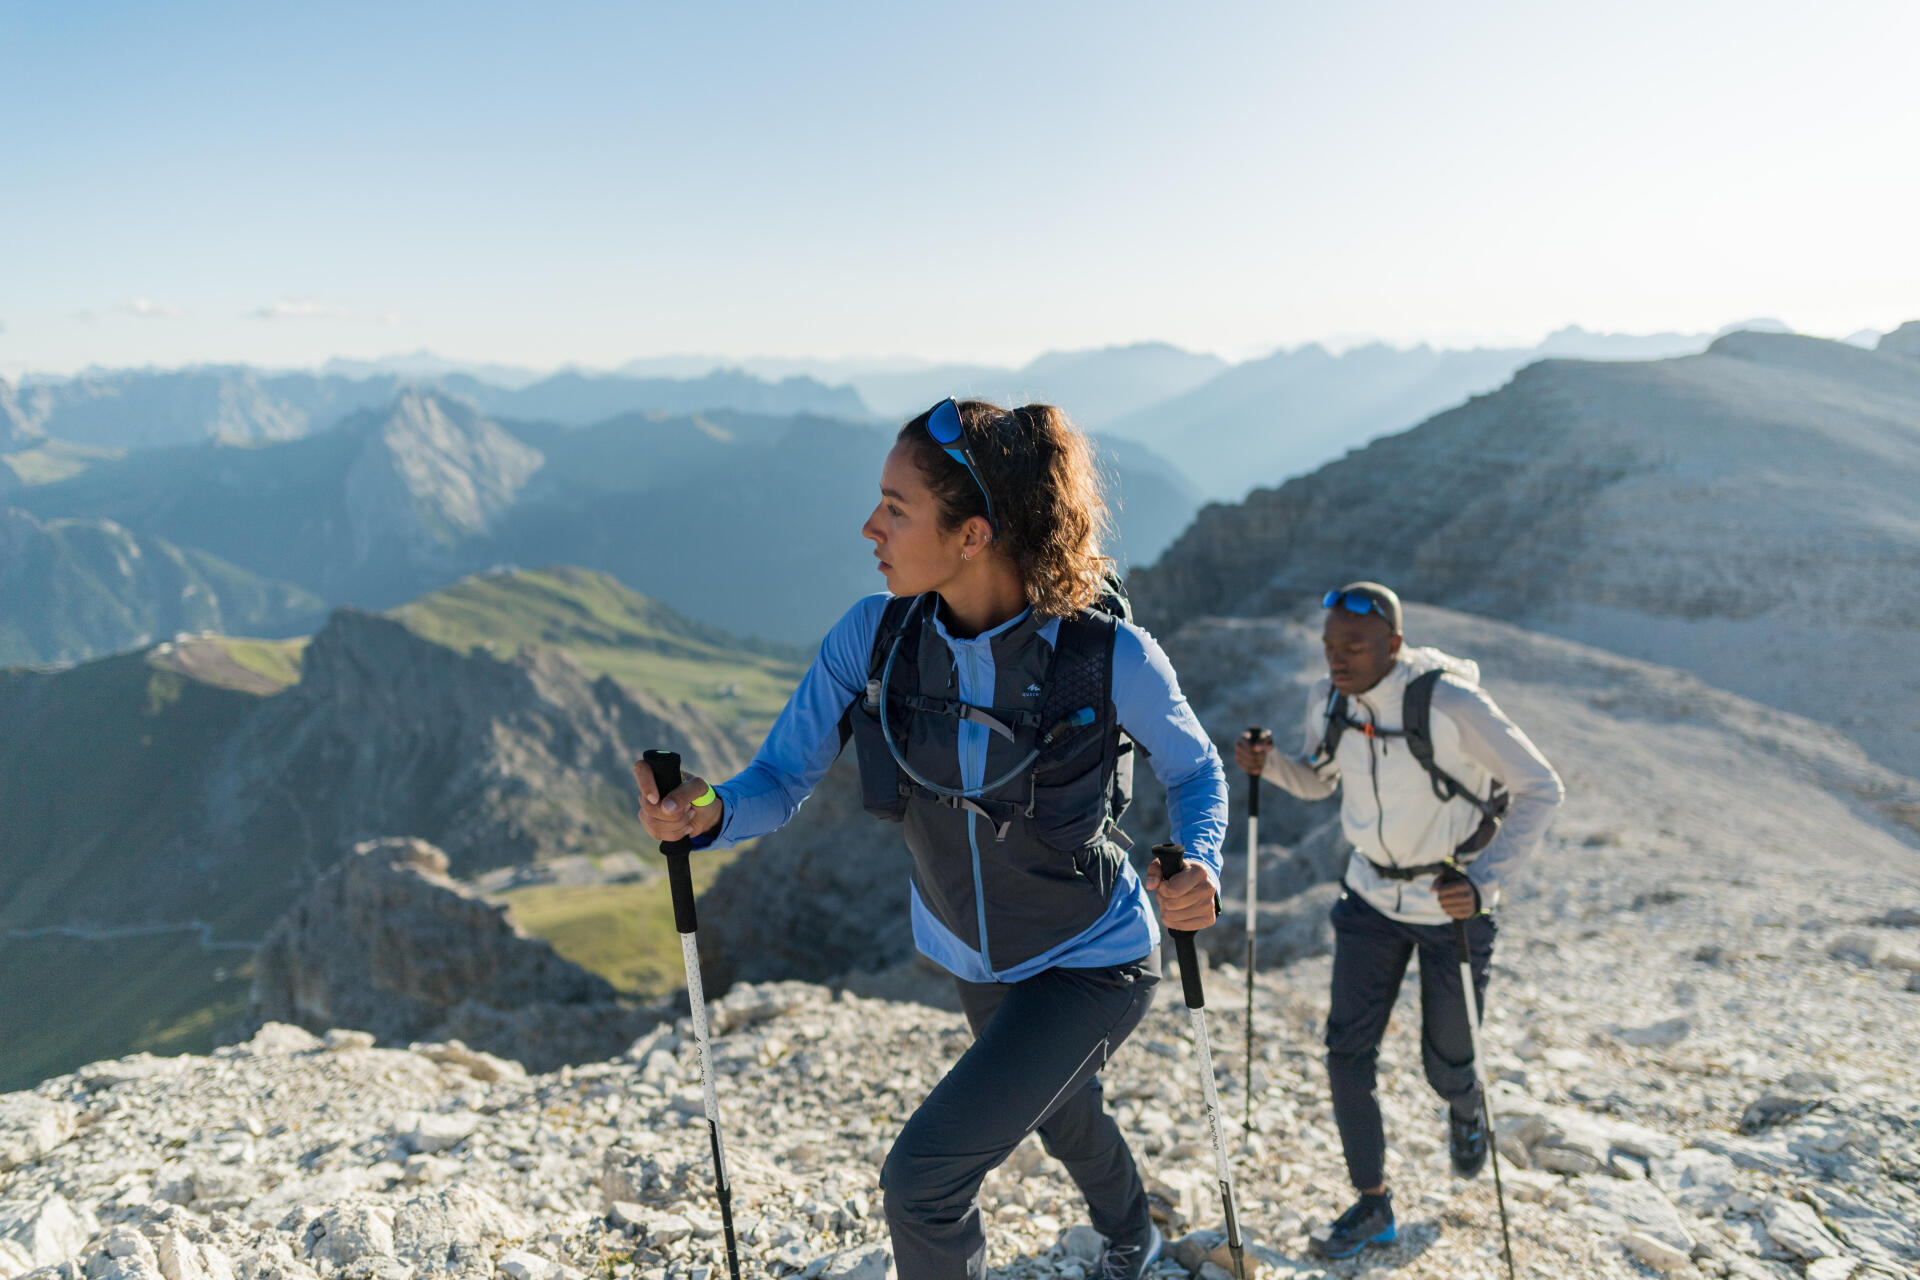 FAST HIKING: THE INNOVATIONS LABORATORY